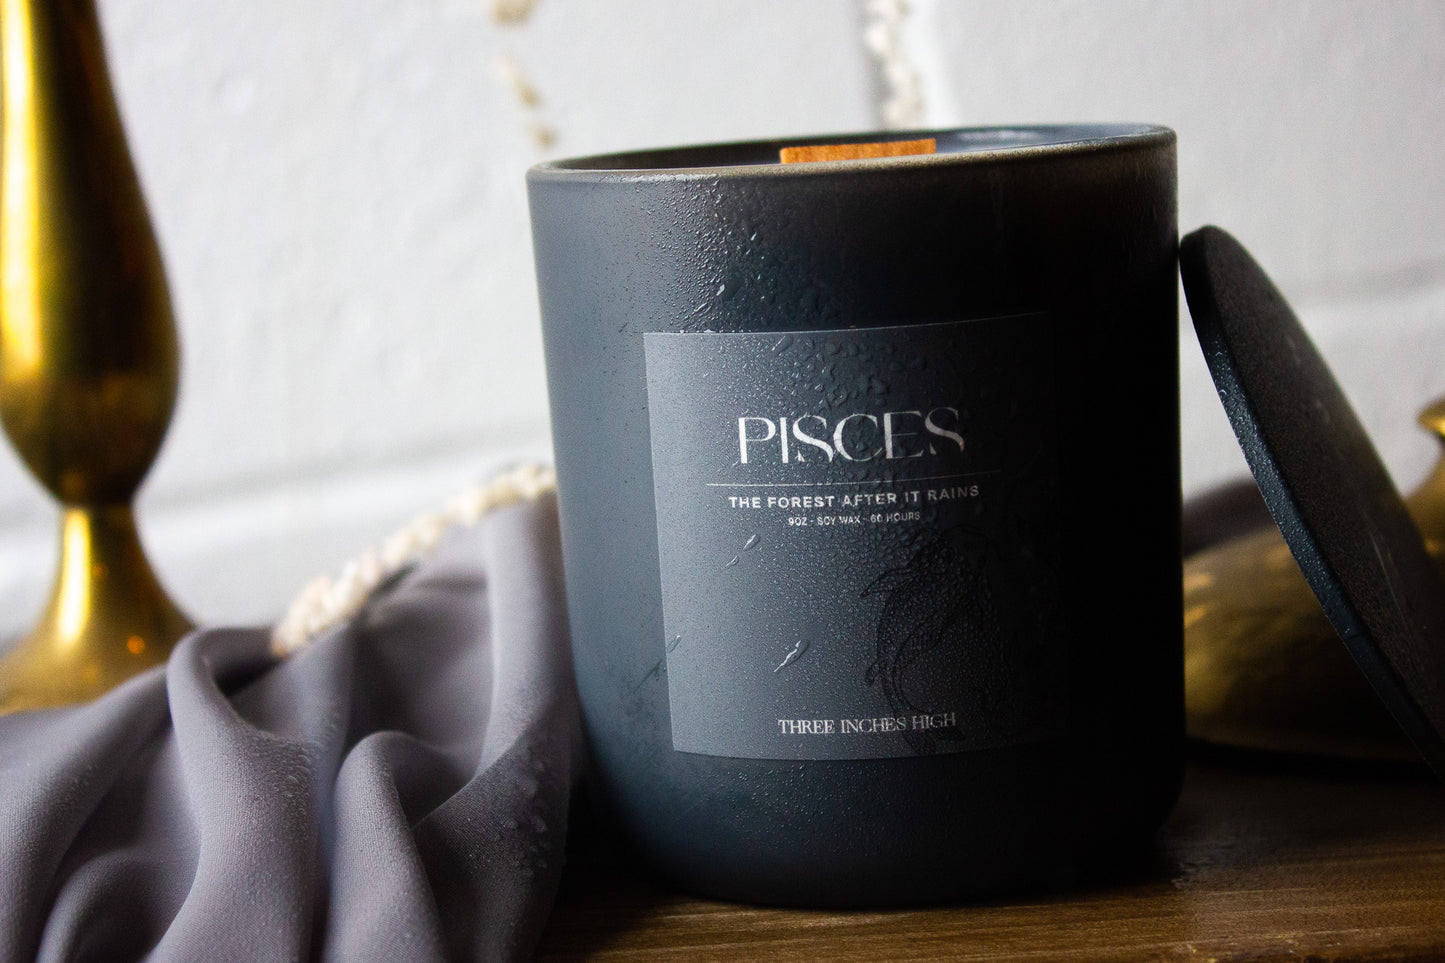 9oz Soy Wax Candle - Pisces